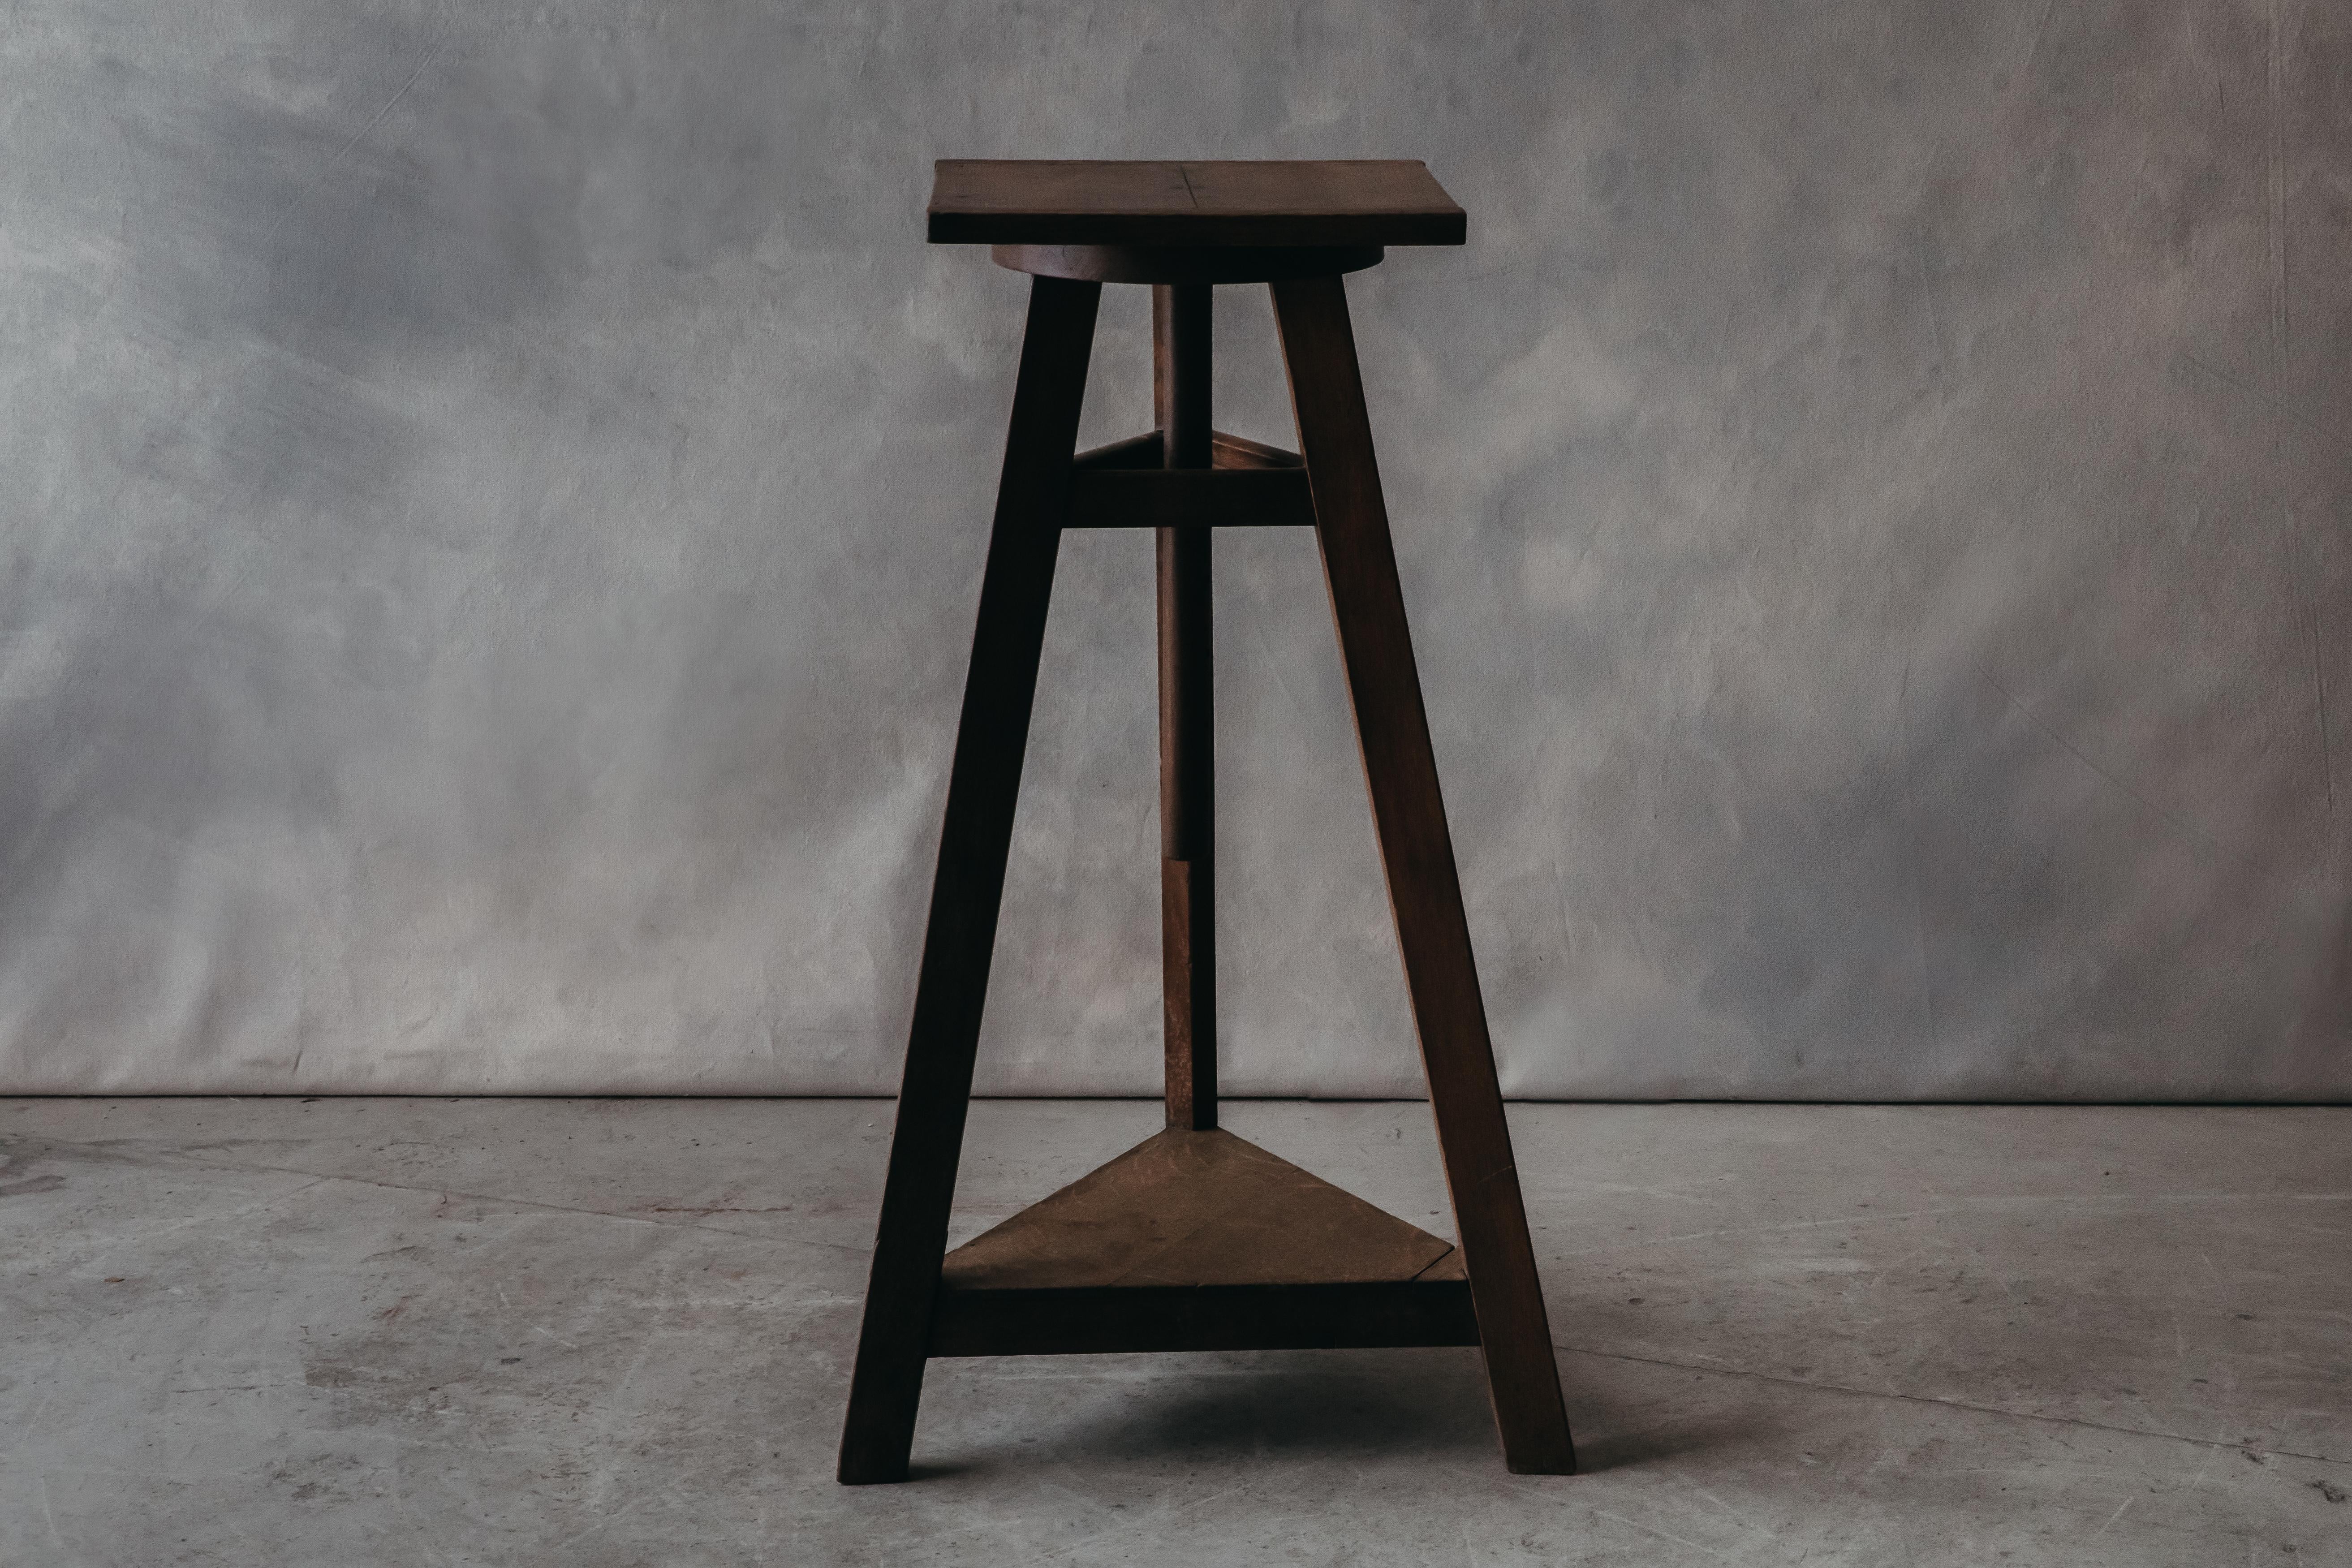 Vintage Oak Sculpture Stand From France, circa 1950. Solid oak construction with nice wear and use.